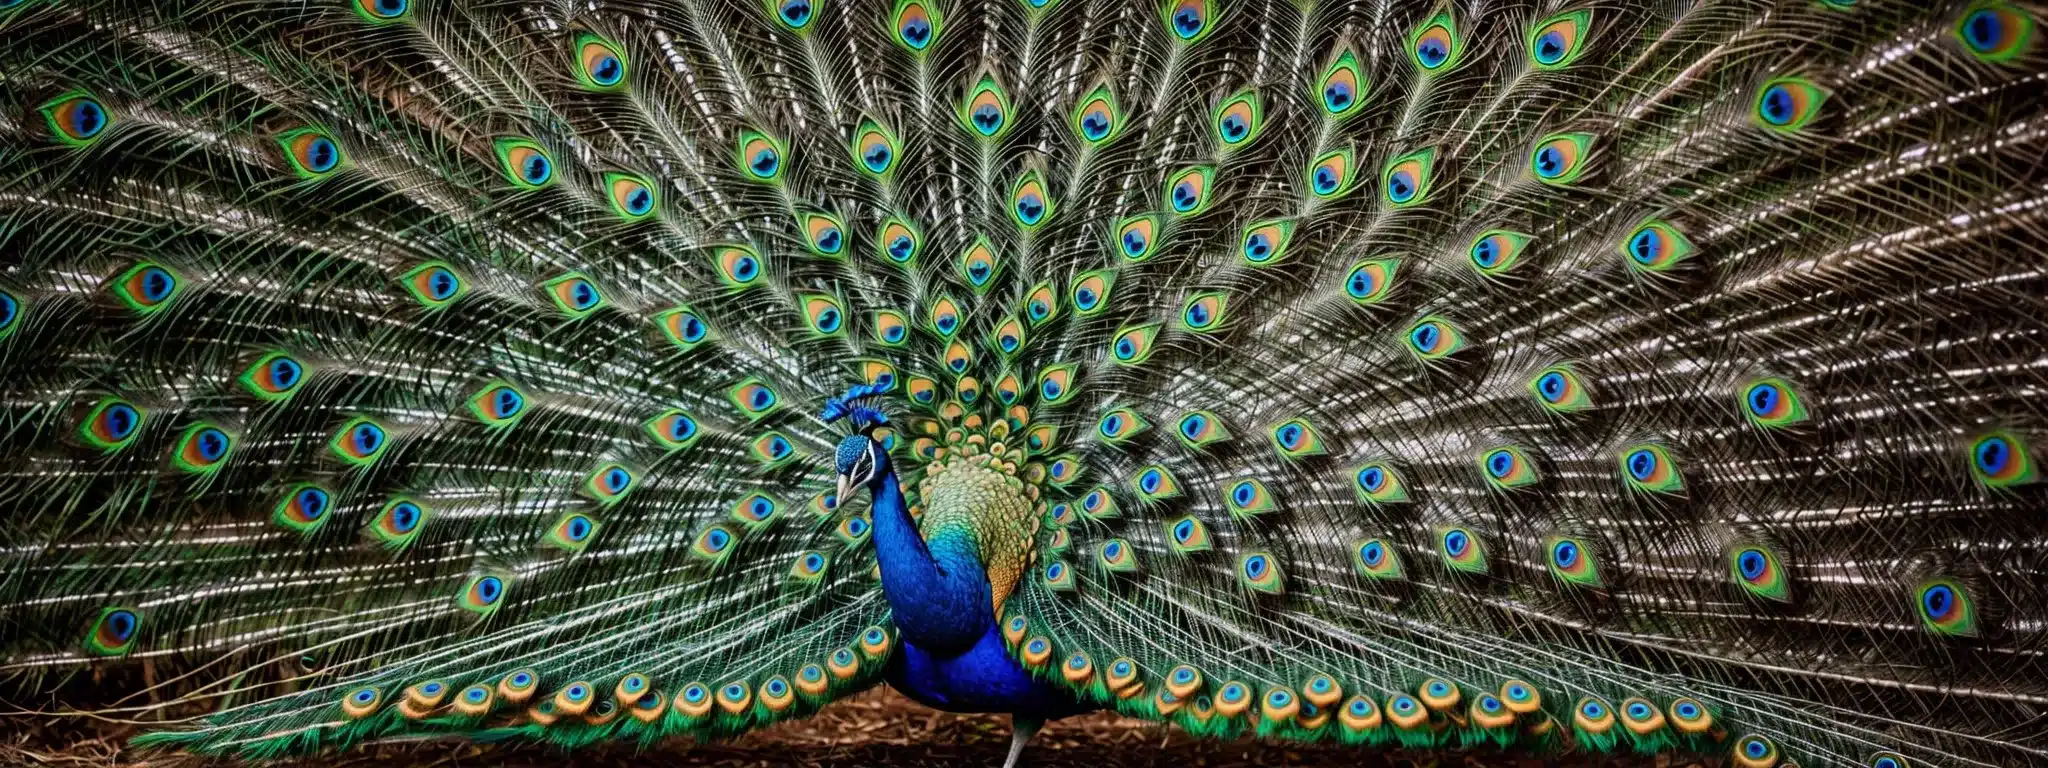 A Majestic Peacock With Its Vibrant Tail Fully Displayed, Showcasing A Spectrum Of Brilliant Colors.